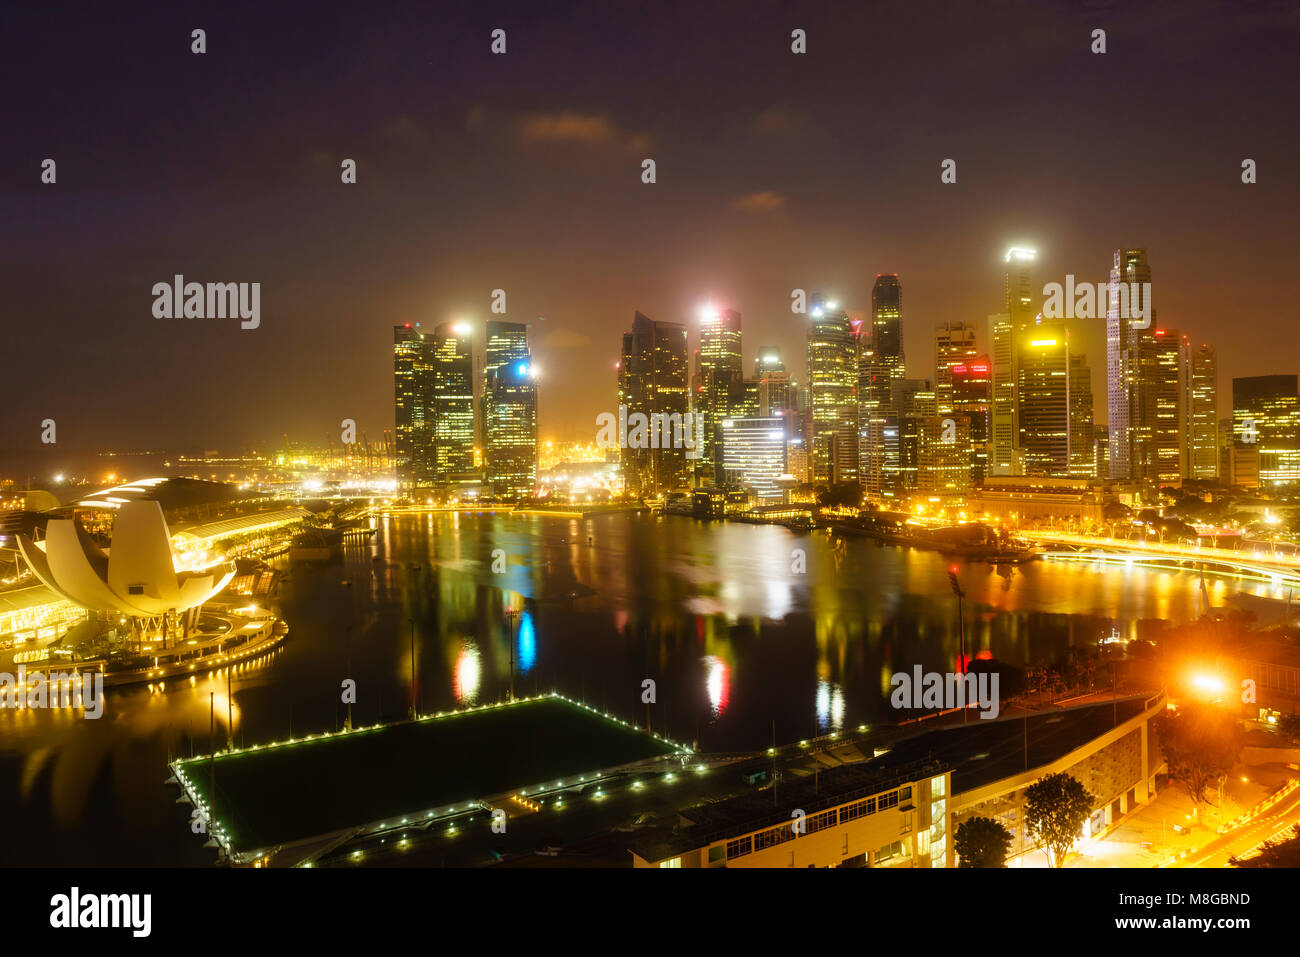 The towers of the Central Business District and Marina Bay by night, Singapore Stock Photo